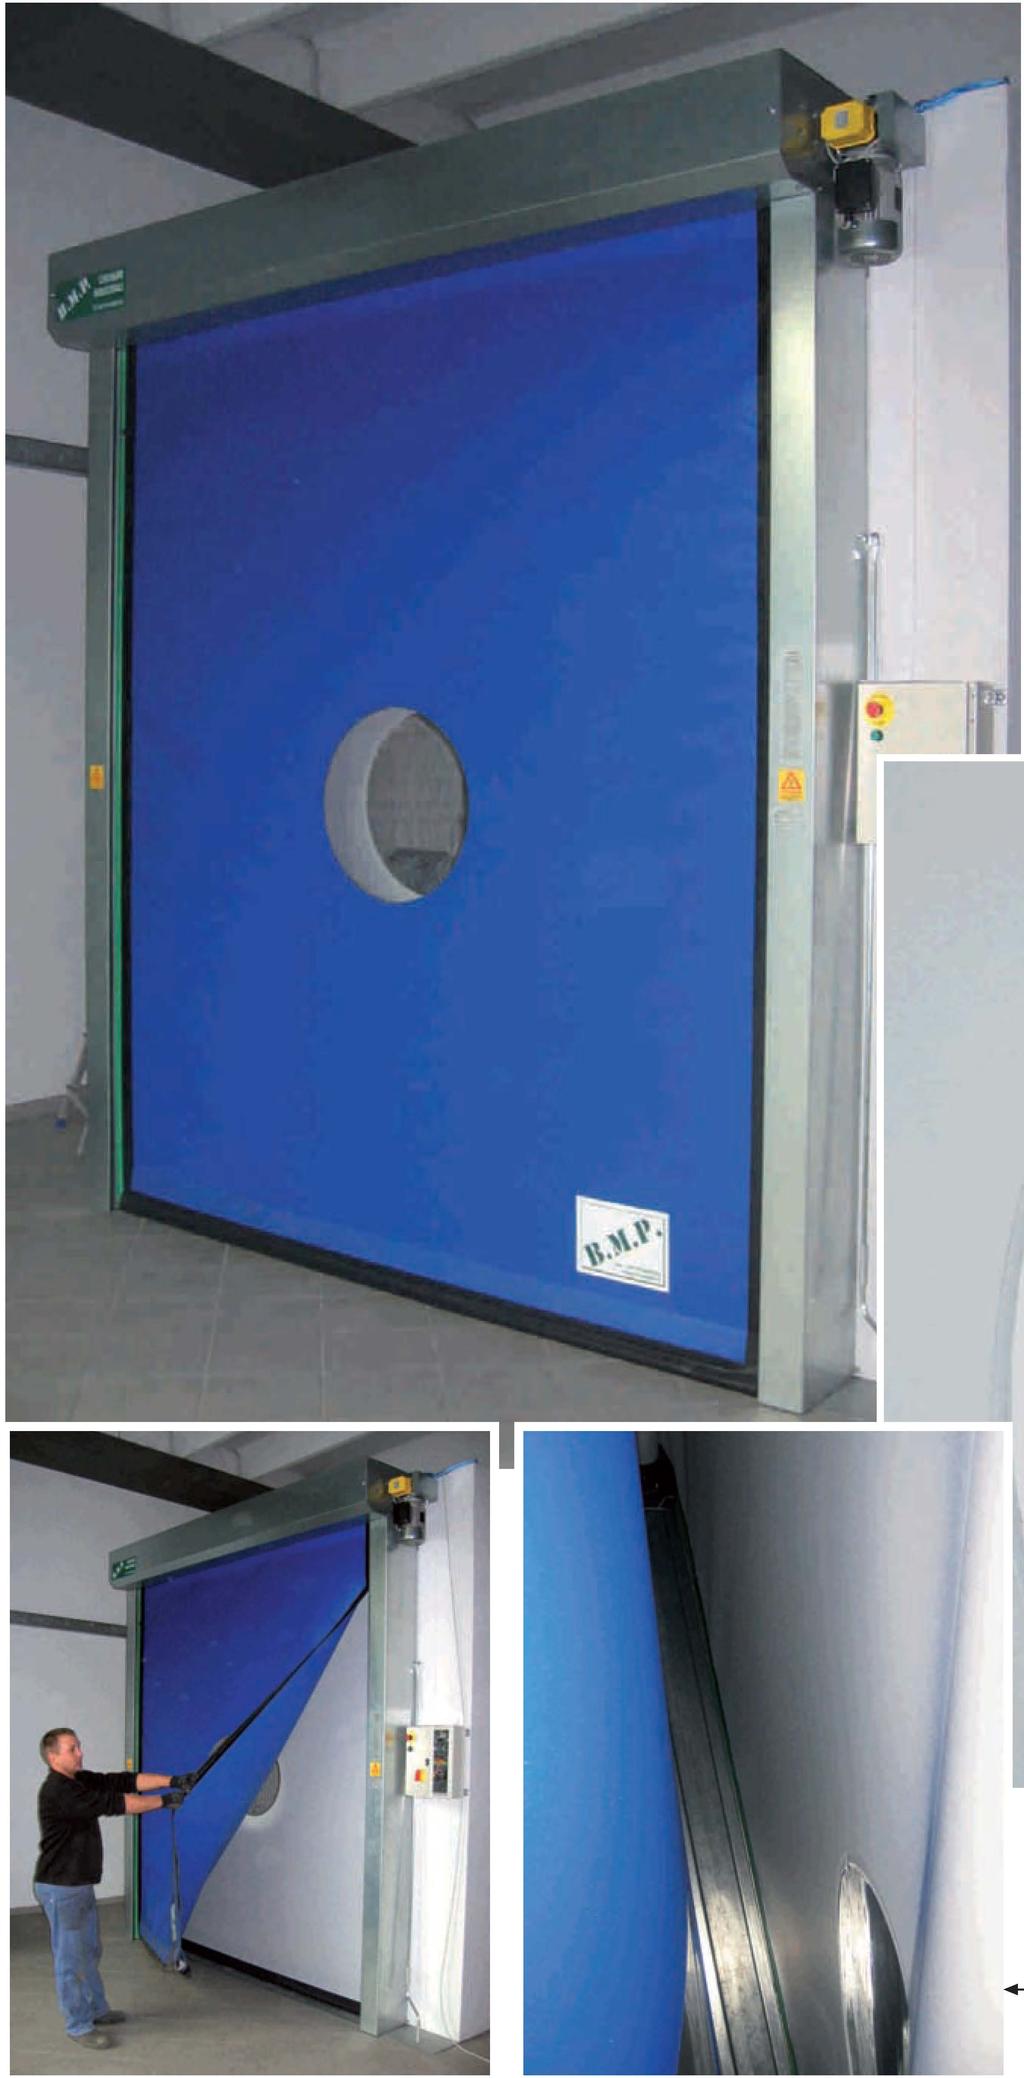 Designed For Freezer Doorways With A Continuous Flow Of Traffic TWO CURTAINS - WHY?